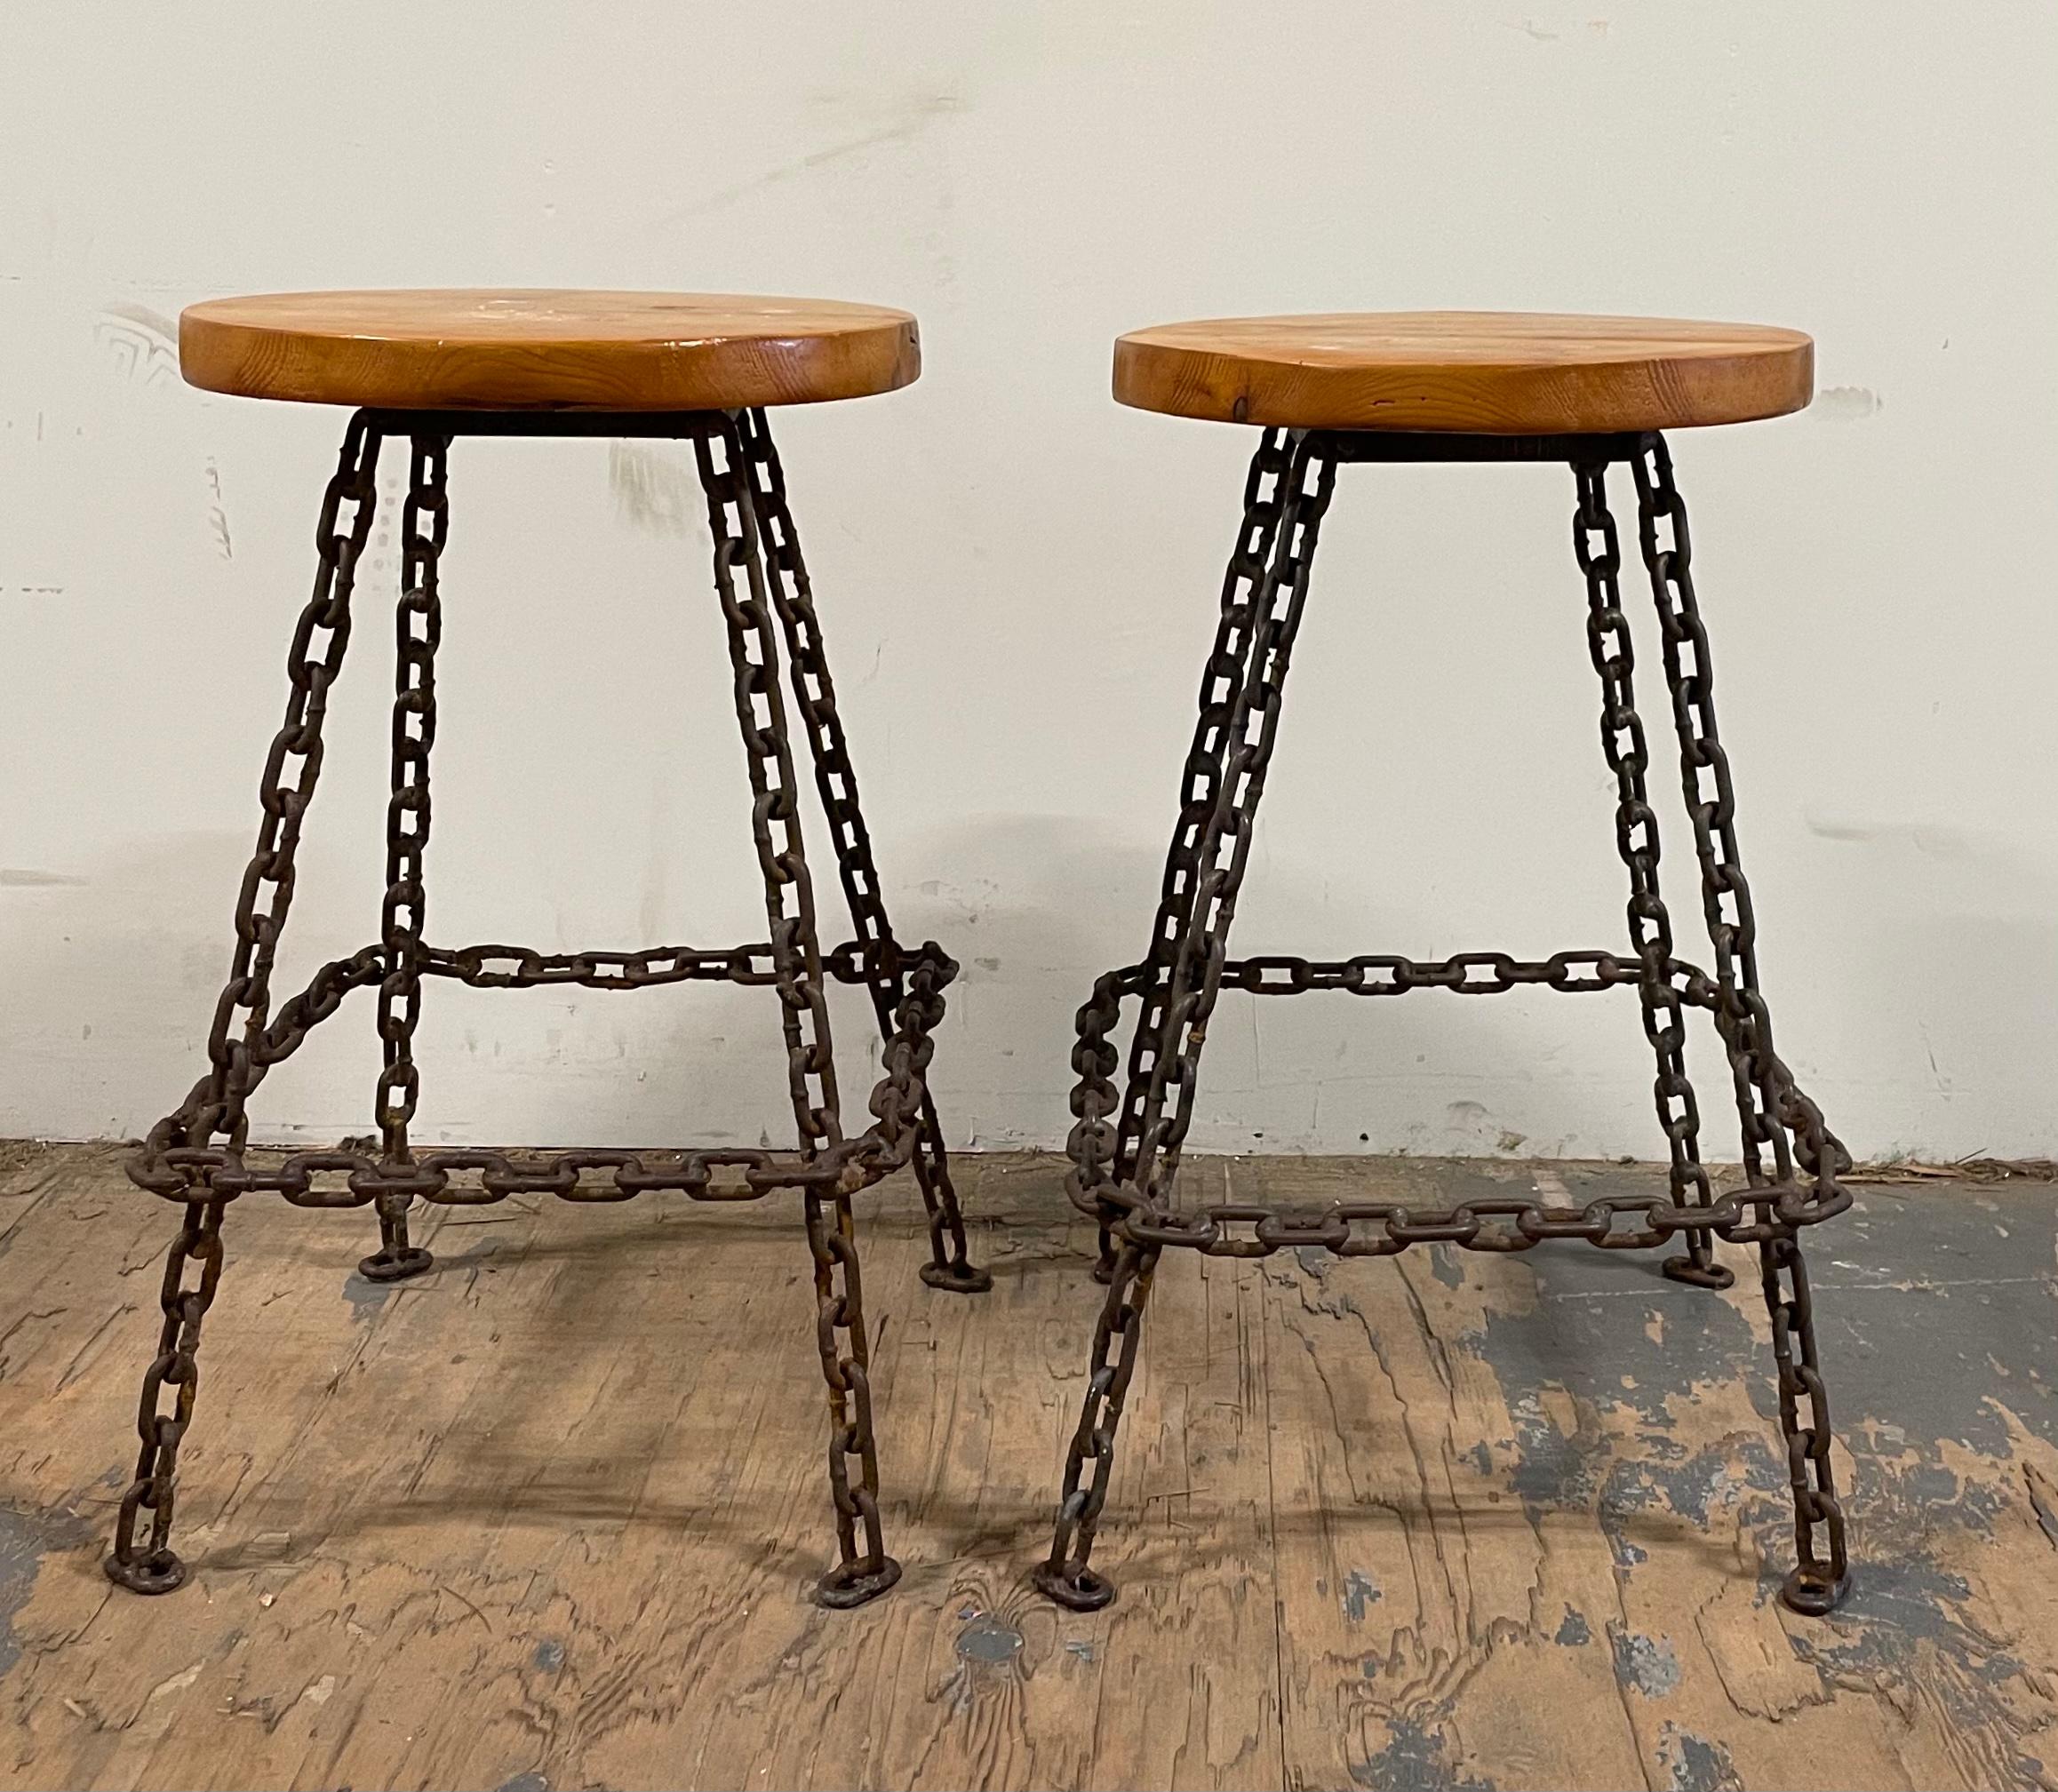 20th Century Set of 4 Brutalist Welded Marine Chain and Wood Bar Stools - 1970's For Sale